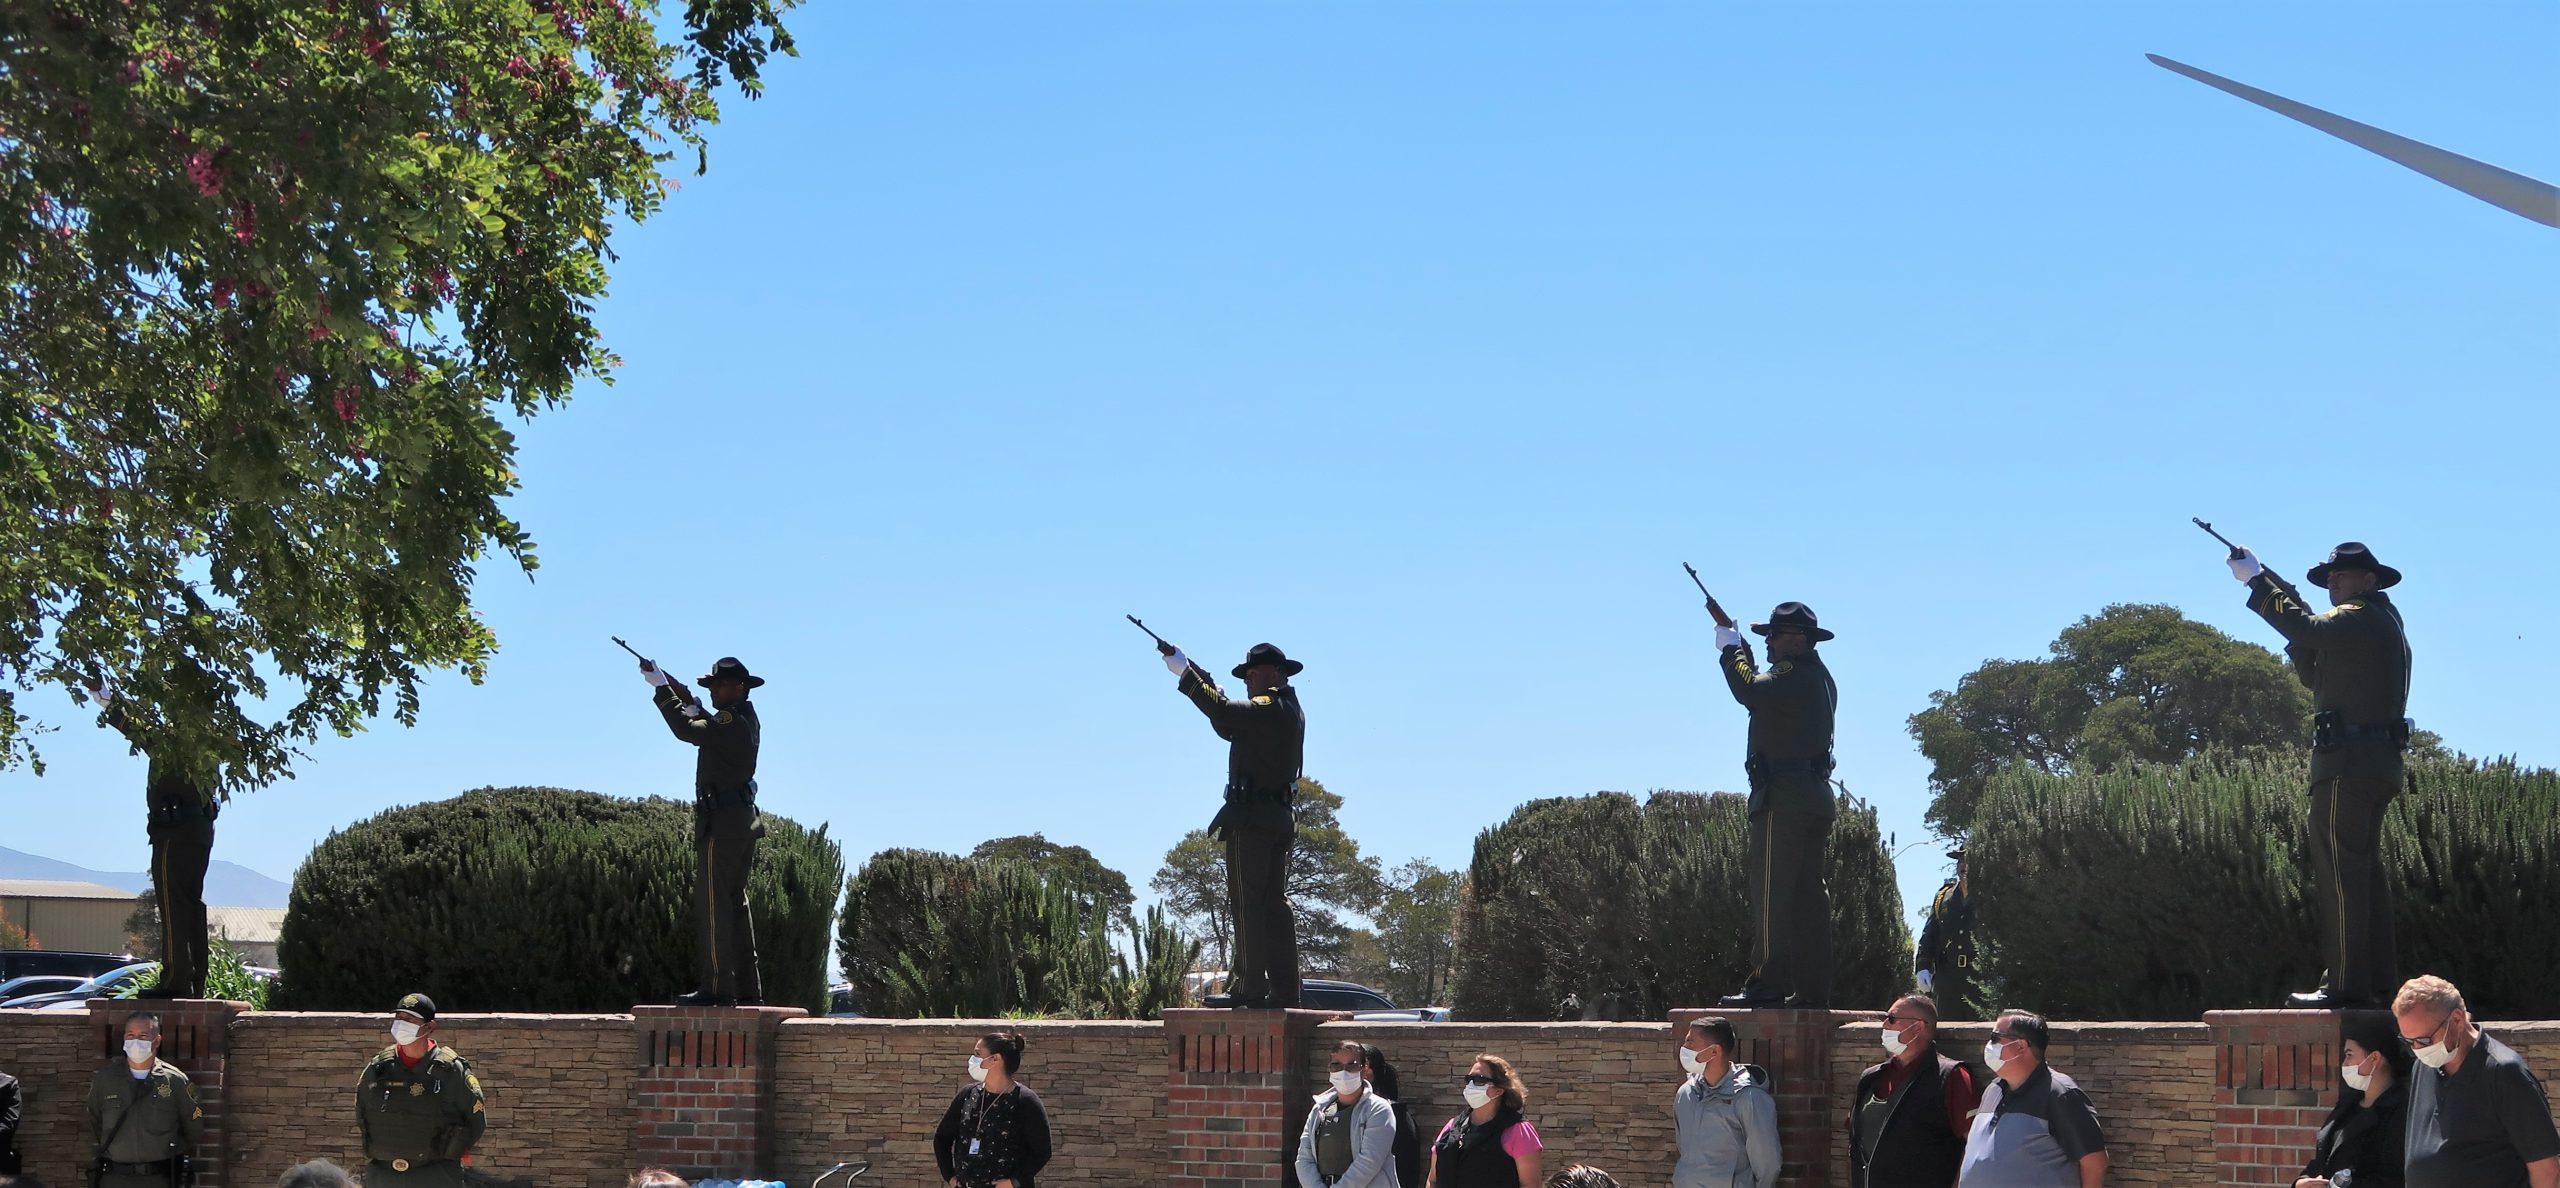 21 gun salute at CTF memorial with men on a wall and holding rifles.